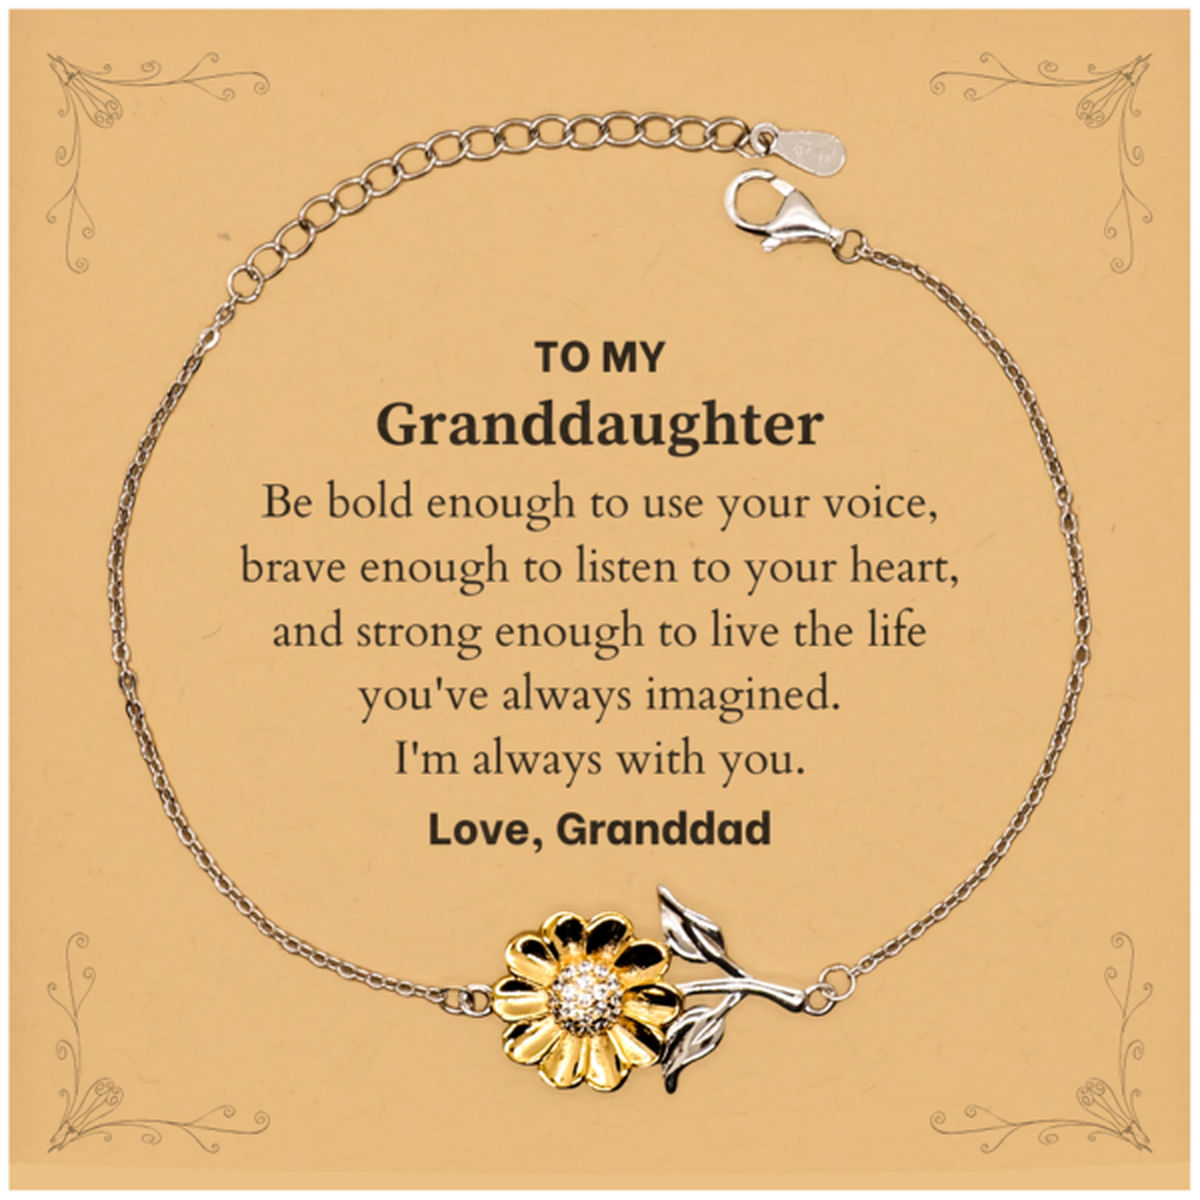 Keepsake Granddaughter Sunflower Bracelet Gift Idea Graduation Christmas Birthday Granddaughter from Granddad, Granddaughter Be bold enough to use your voice, brave enough to listen to your heart. Love, Granddad